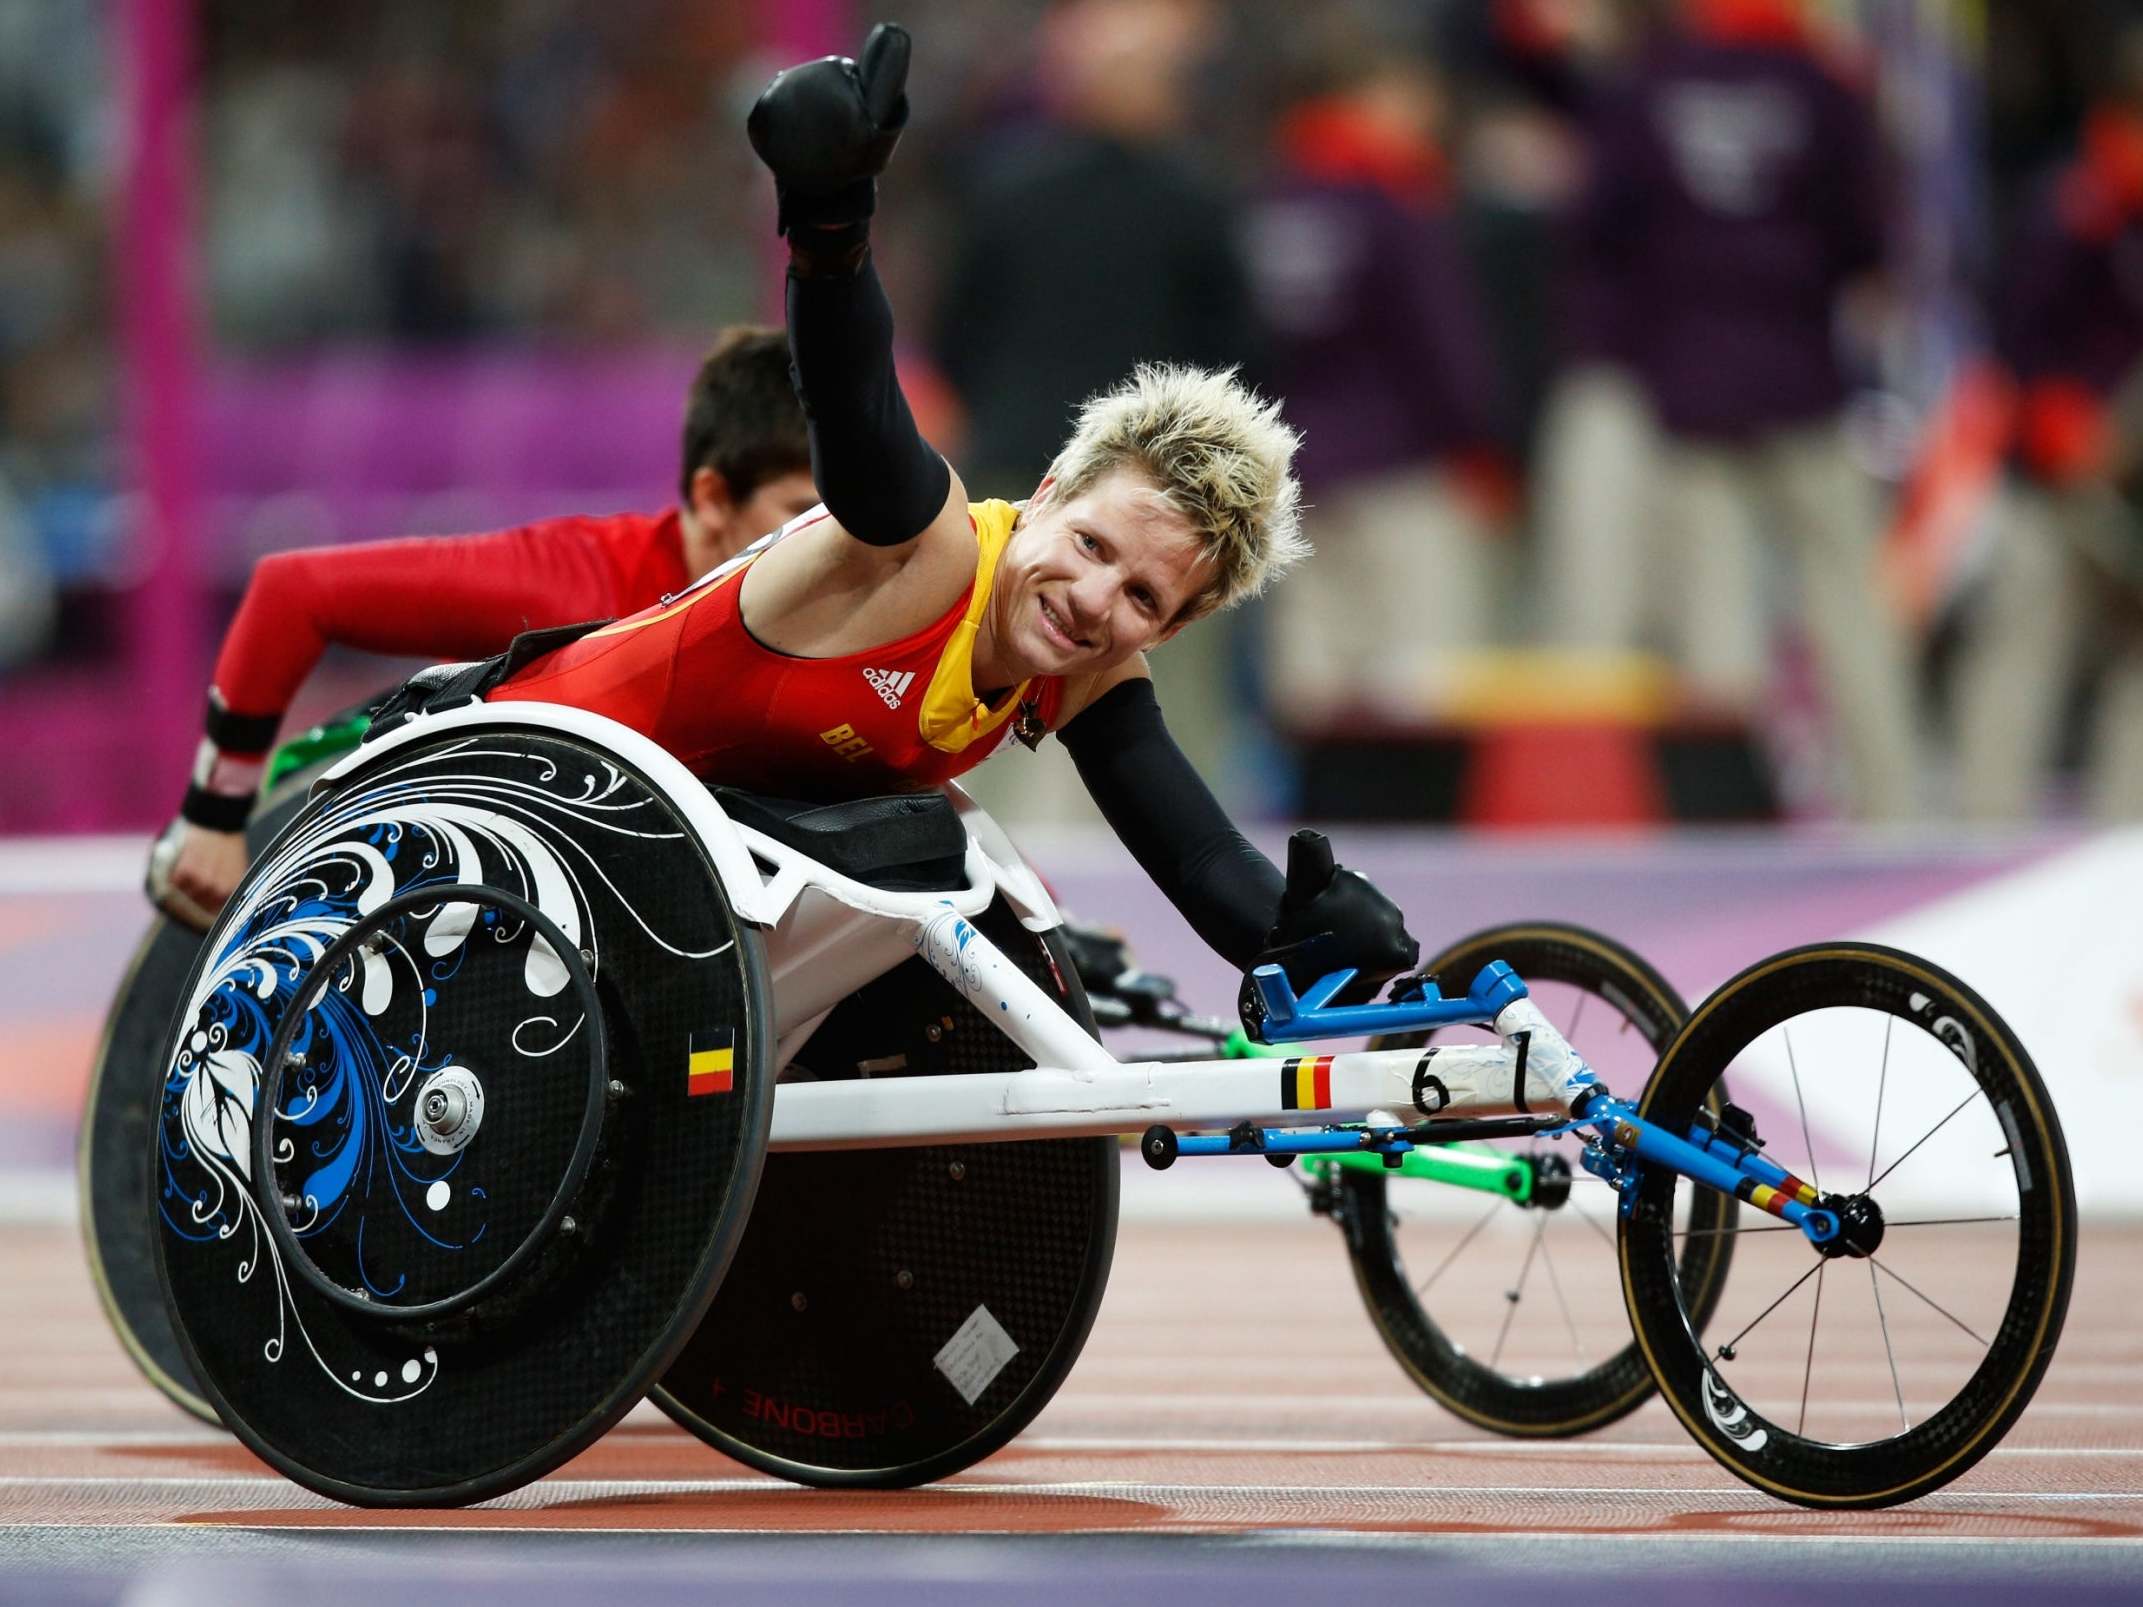 Vervoort wins gold in the women's 100m T52 final at the London Paralympics in 2012